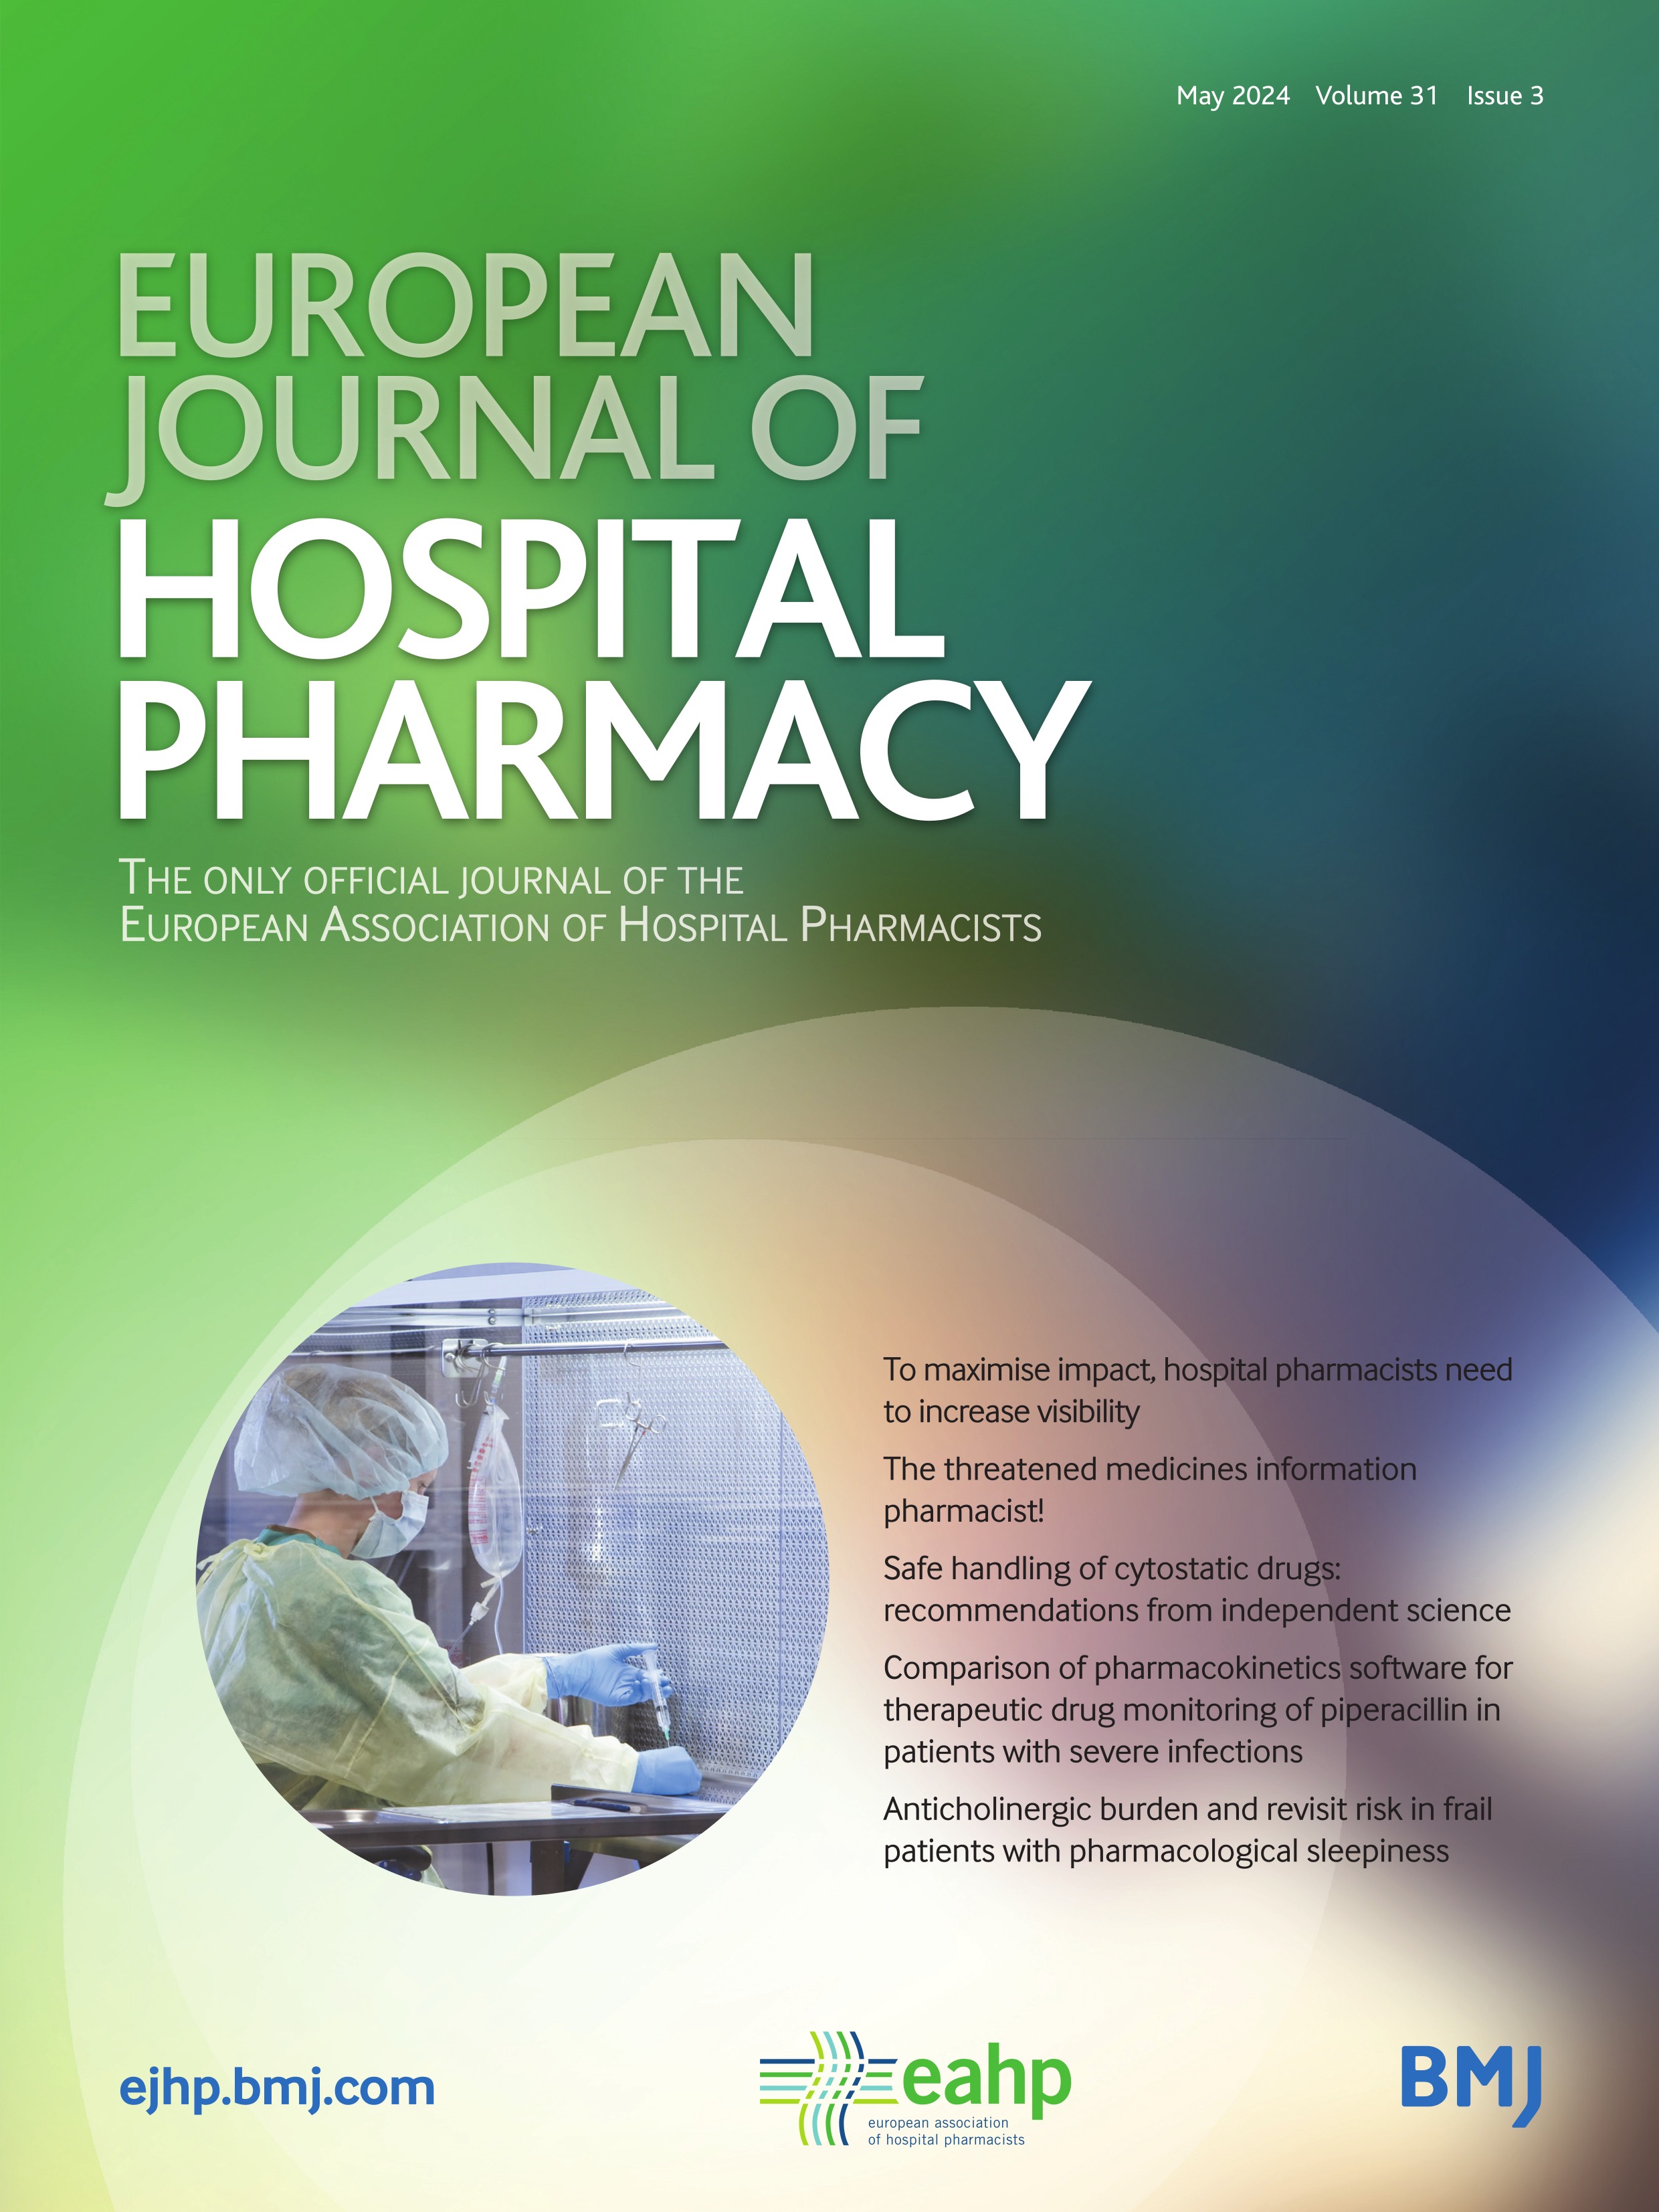 Meropenem population pharmacokinetics and model-based dosing optimisation in patients with serious bacterial infection